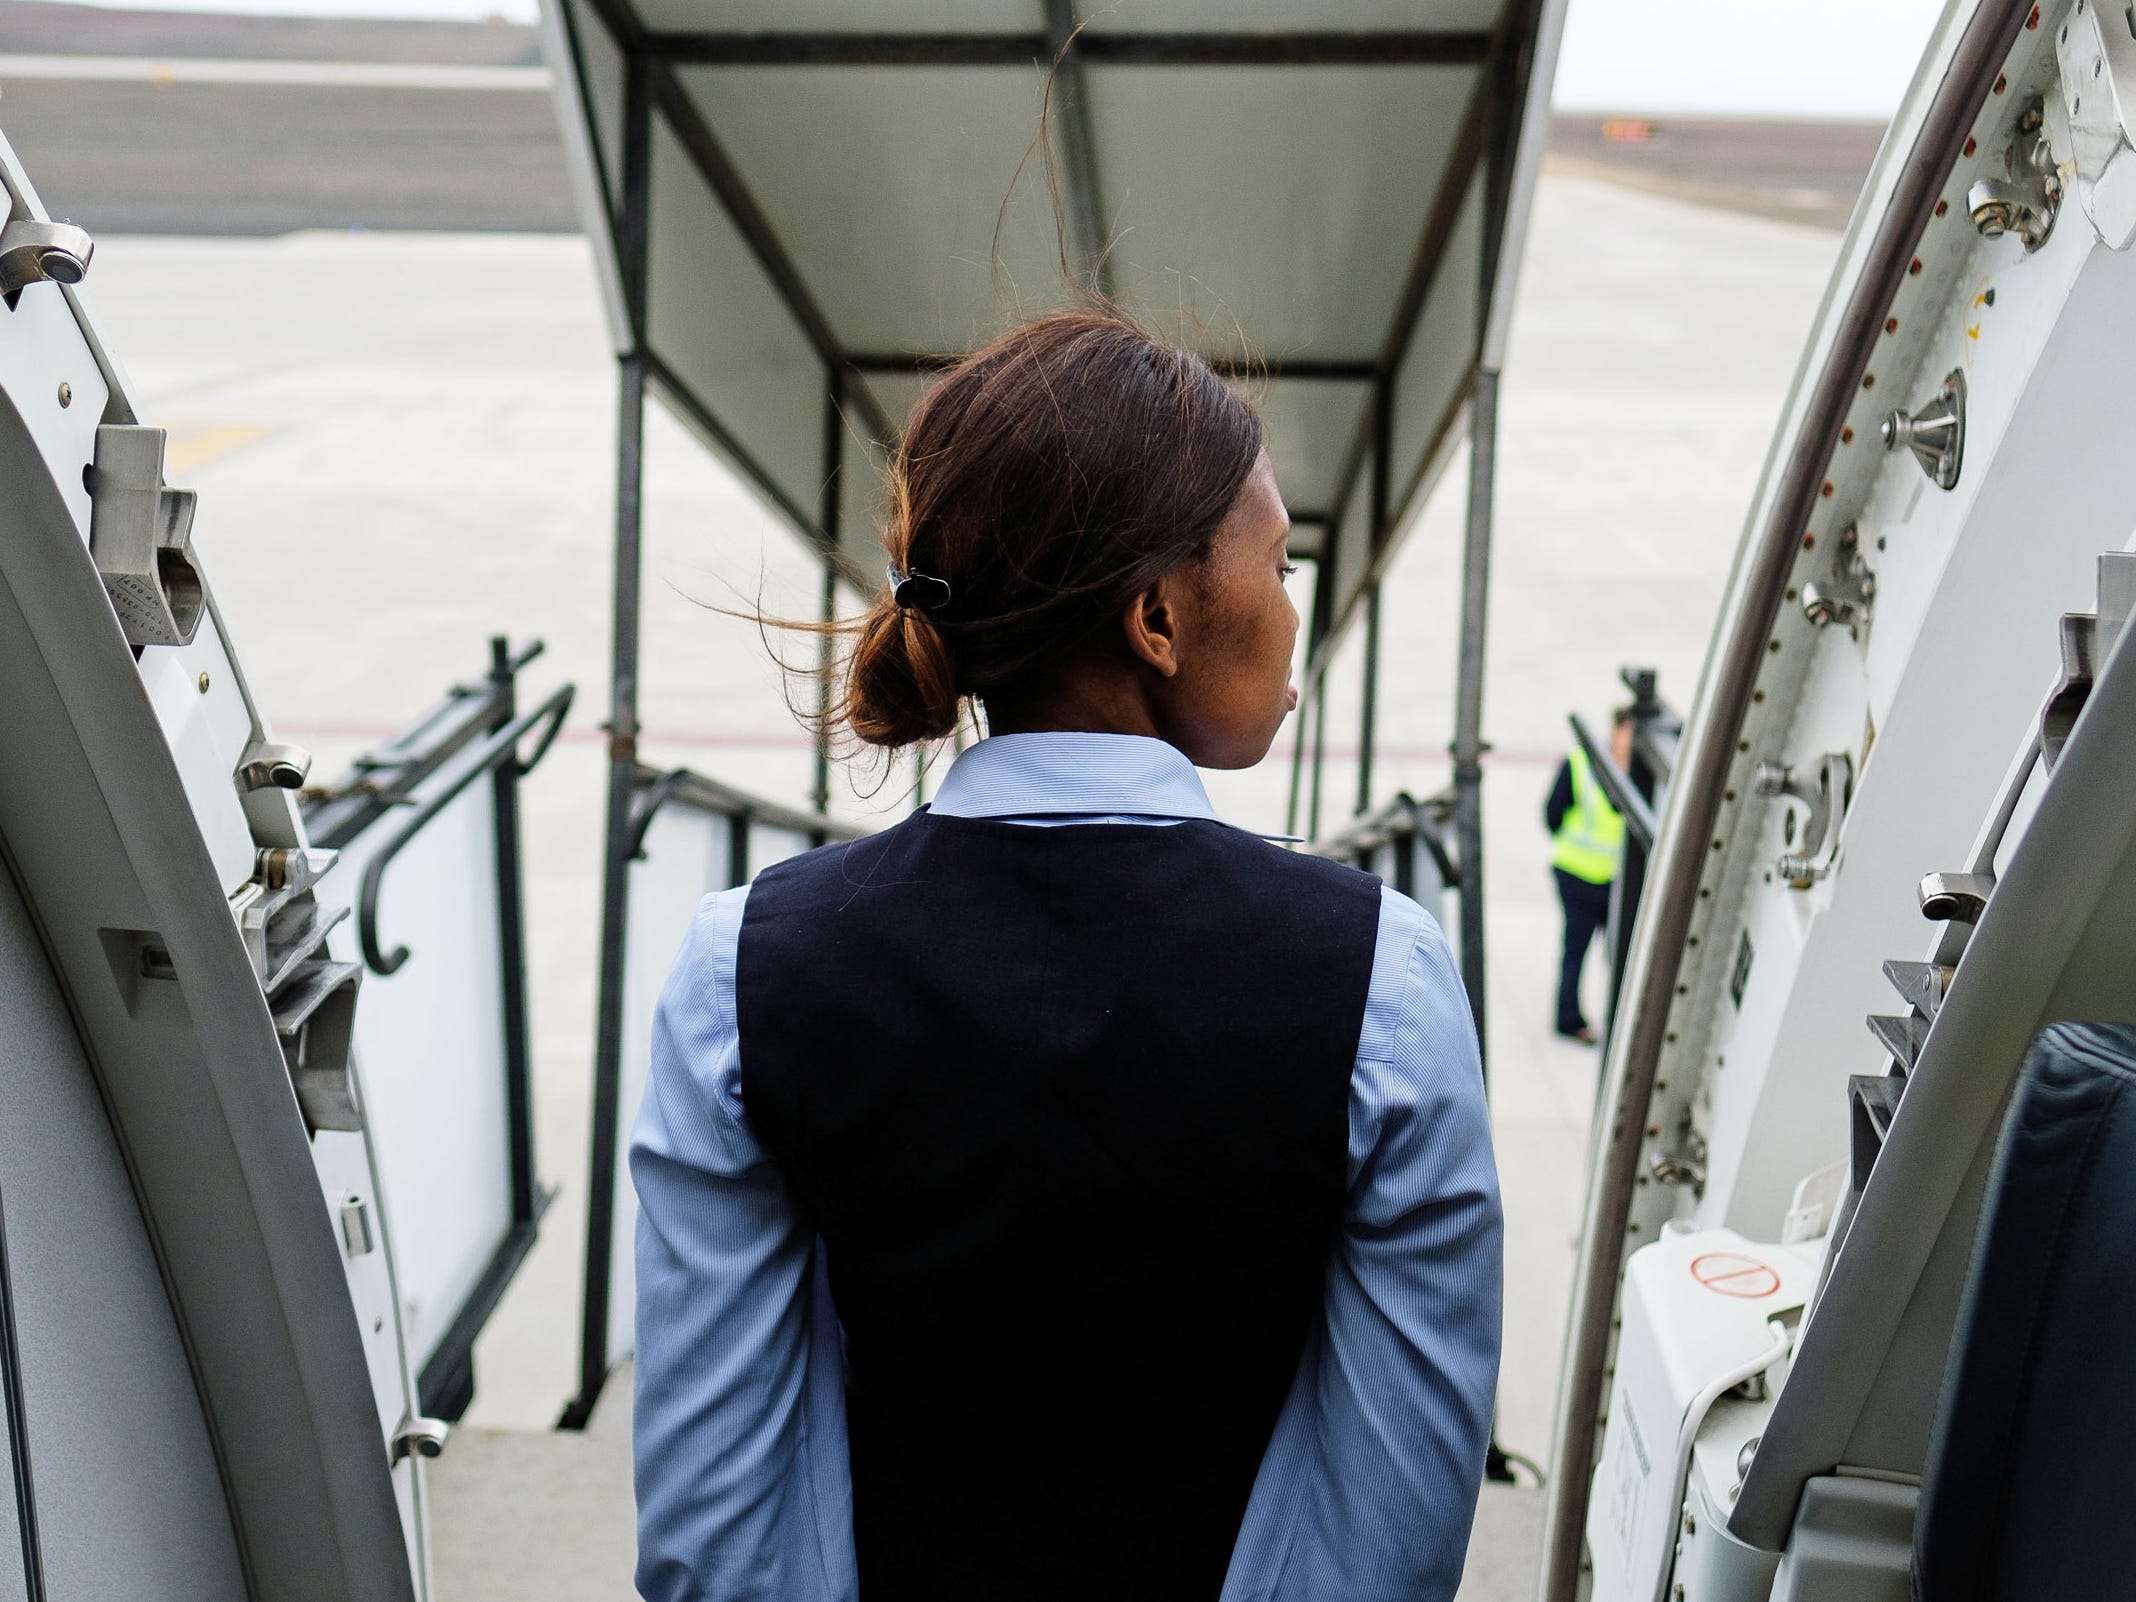 Flight Attendants Reveal 14 Things They Wish All Passengers Would Start